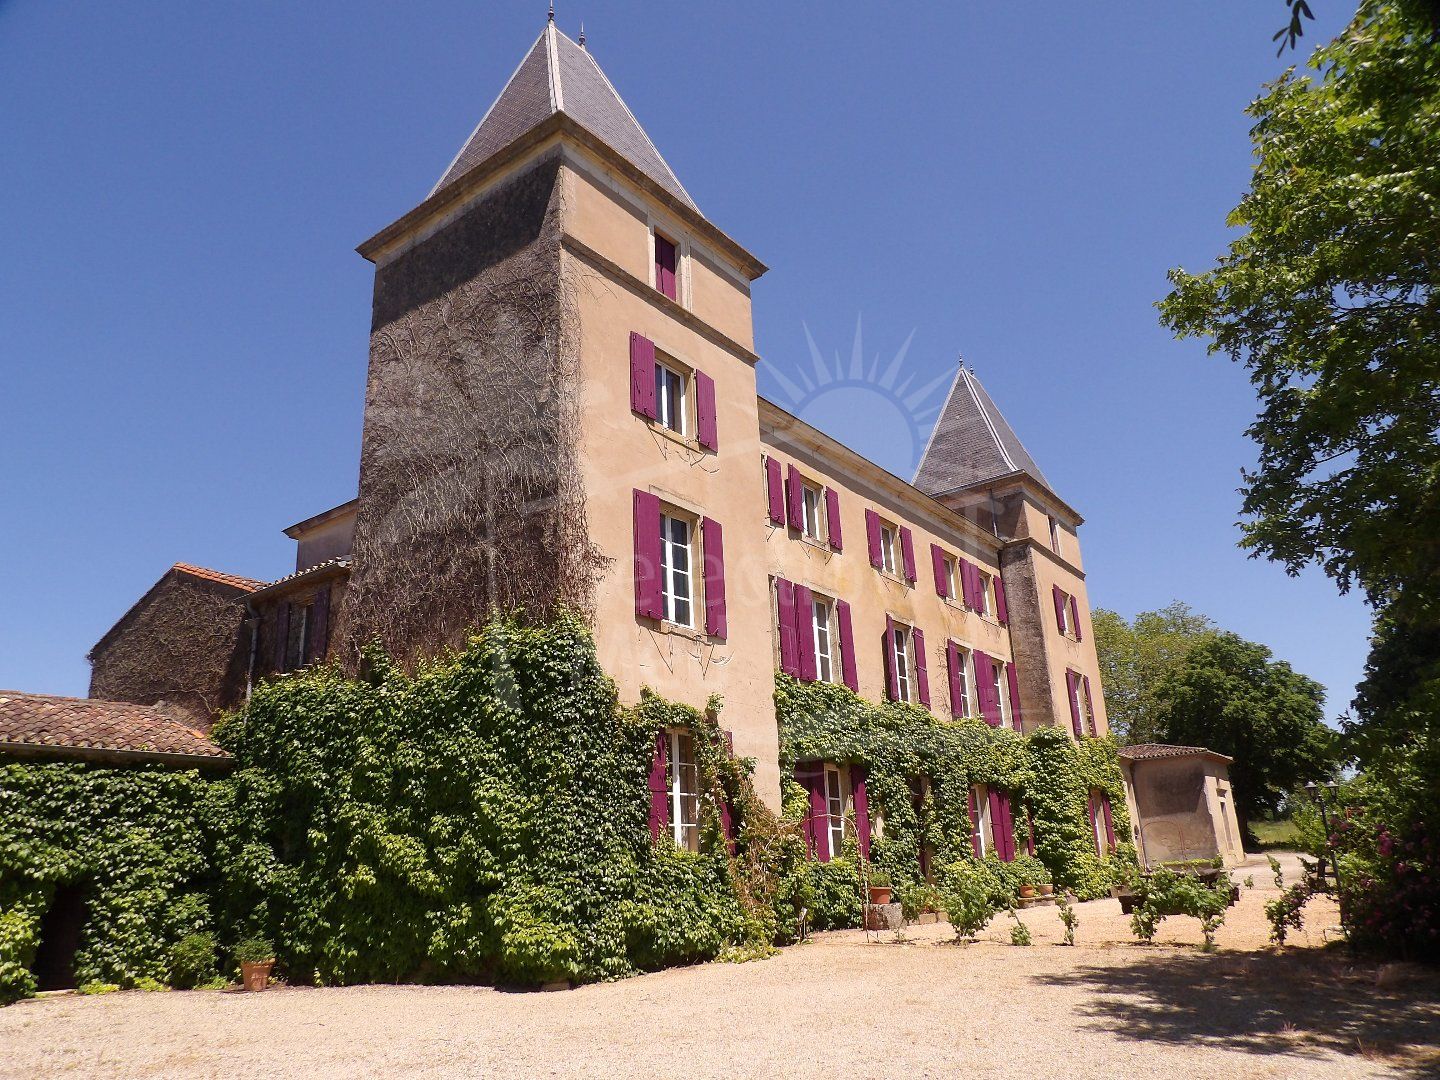 Authentique 20th century chateau with breath-taking views of the Pyrenees.